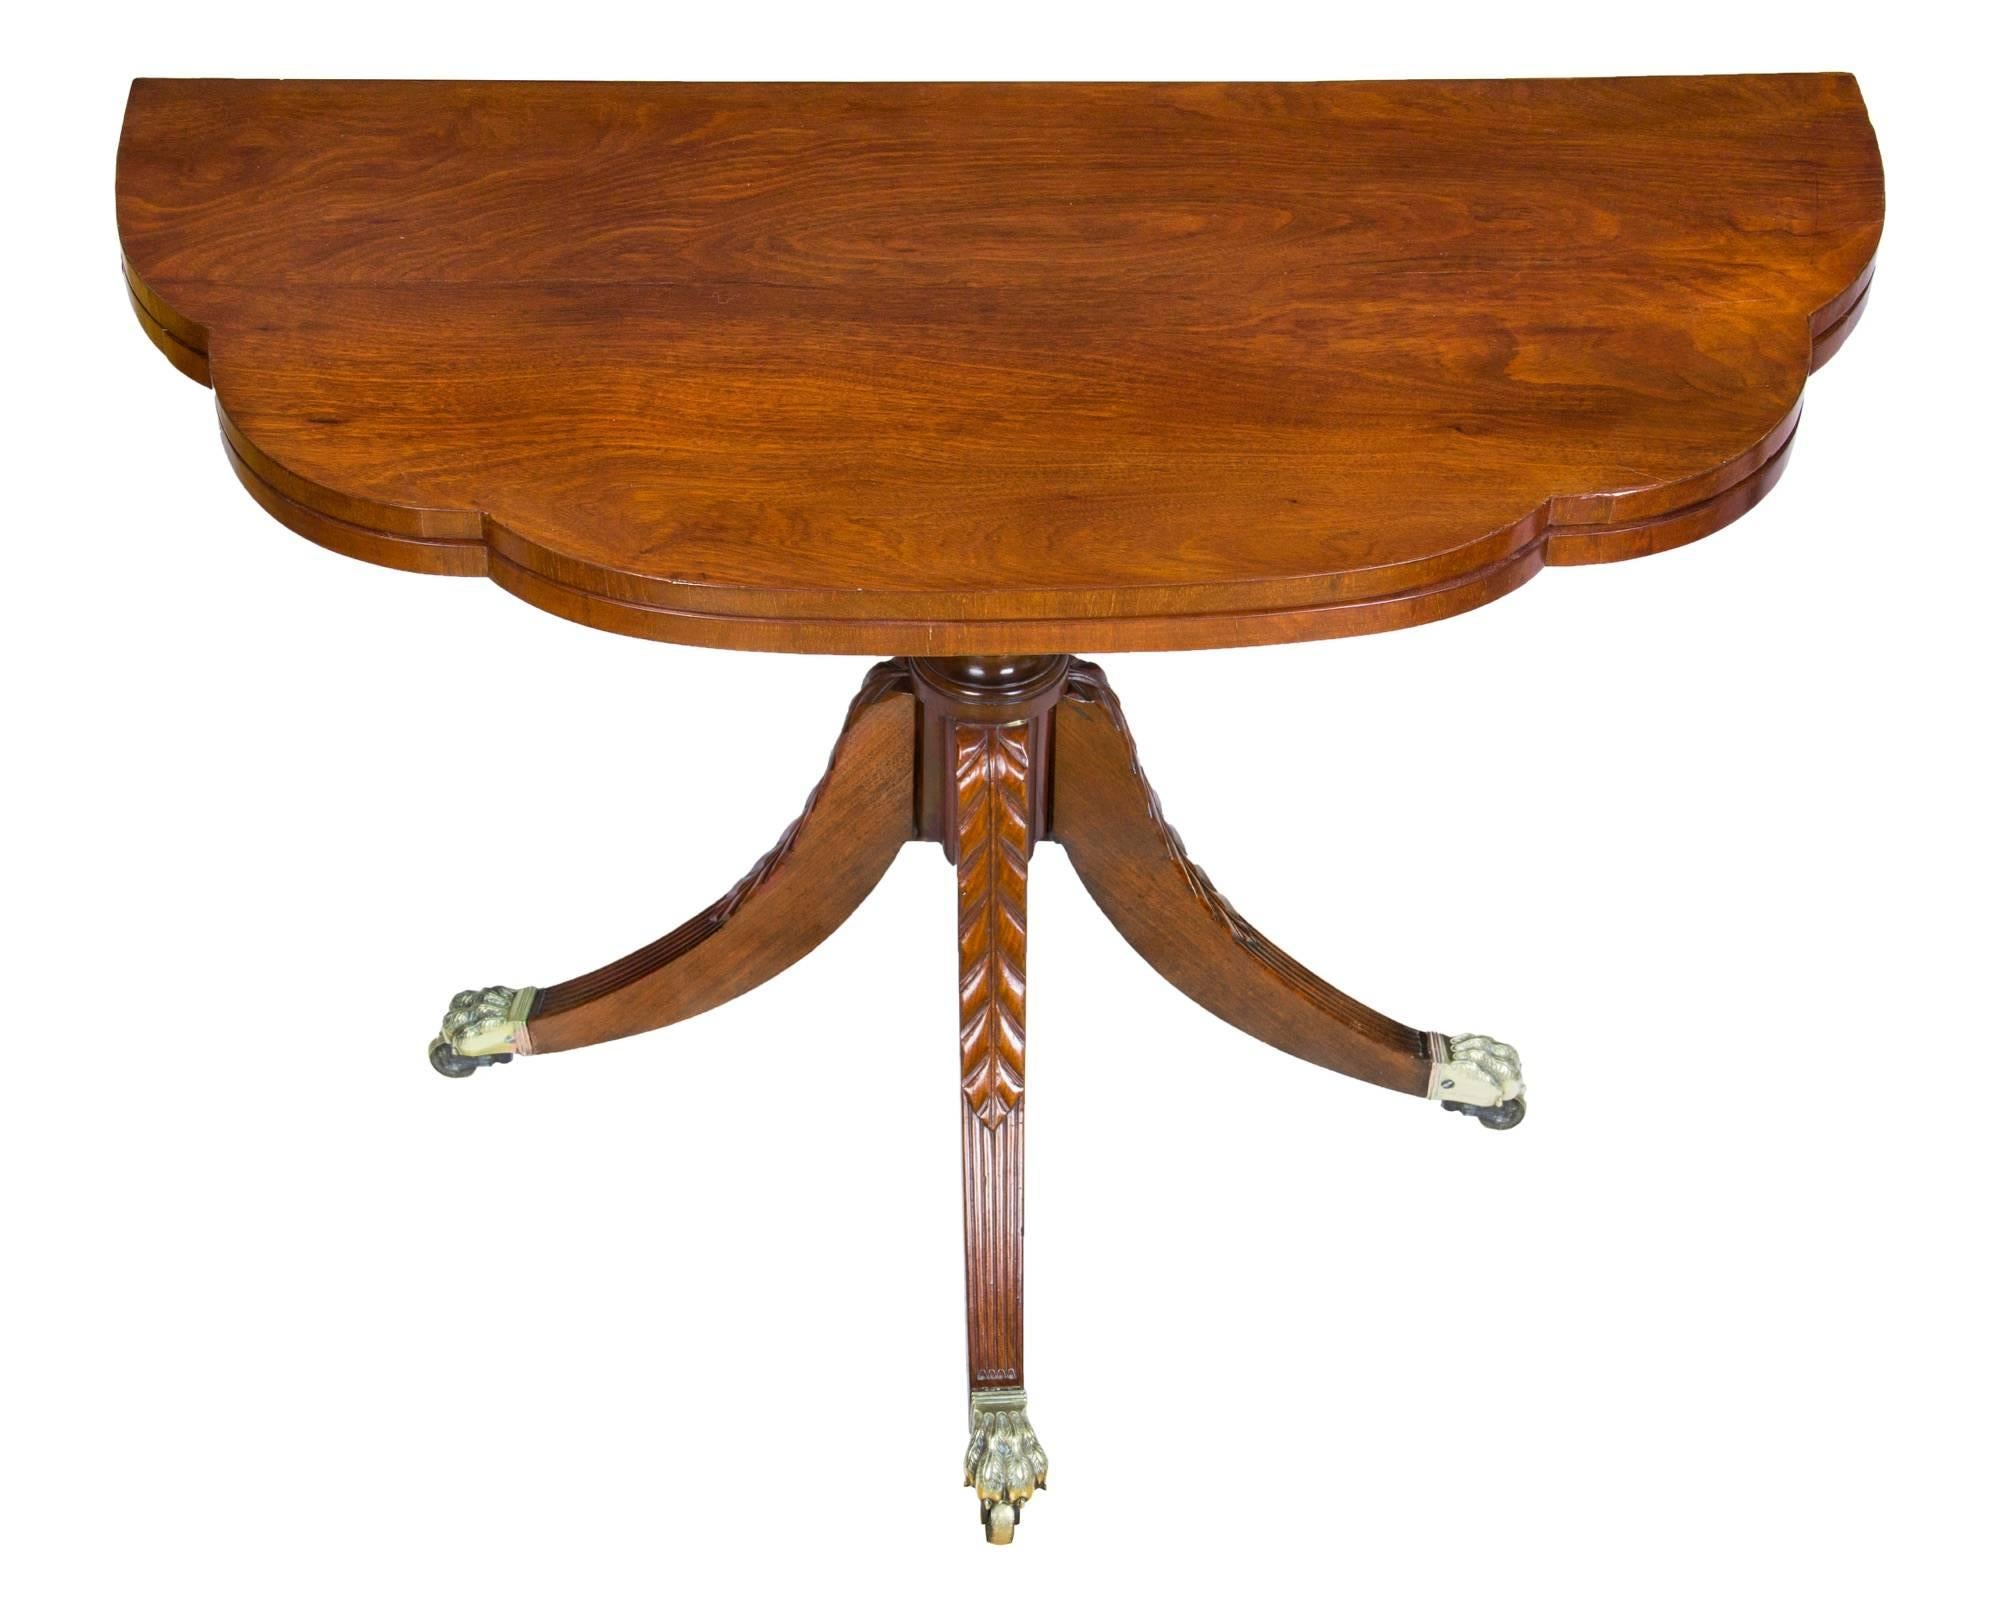 There are many variations on this table, and one of the primary points of connoisseurship is the shape of the top. Some are demilune, (half round) and some have two elliptical curves, and sometimes even three, which this table has, to its credit. Of